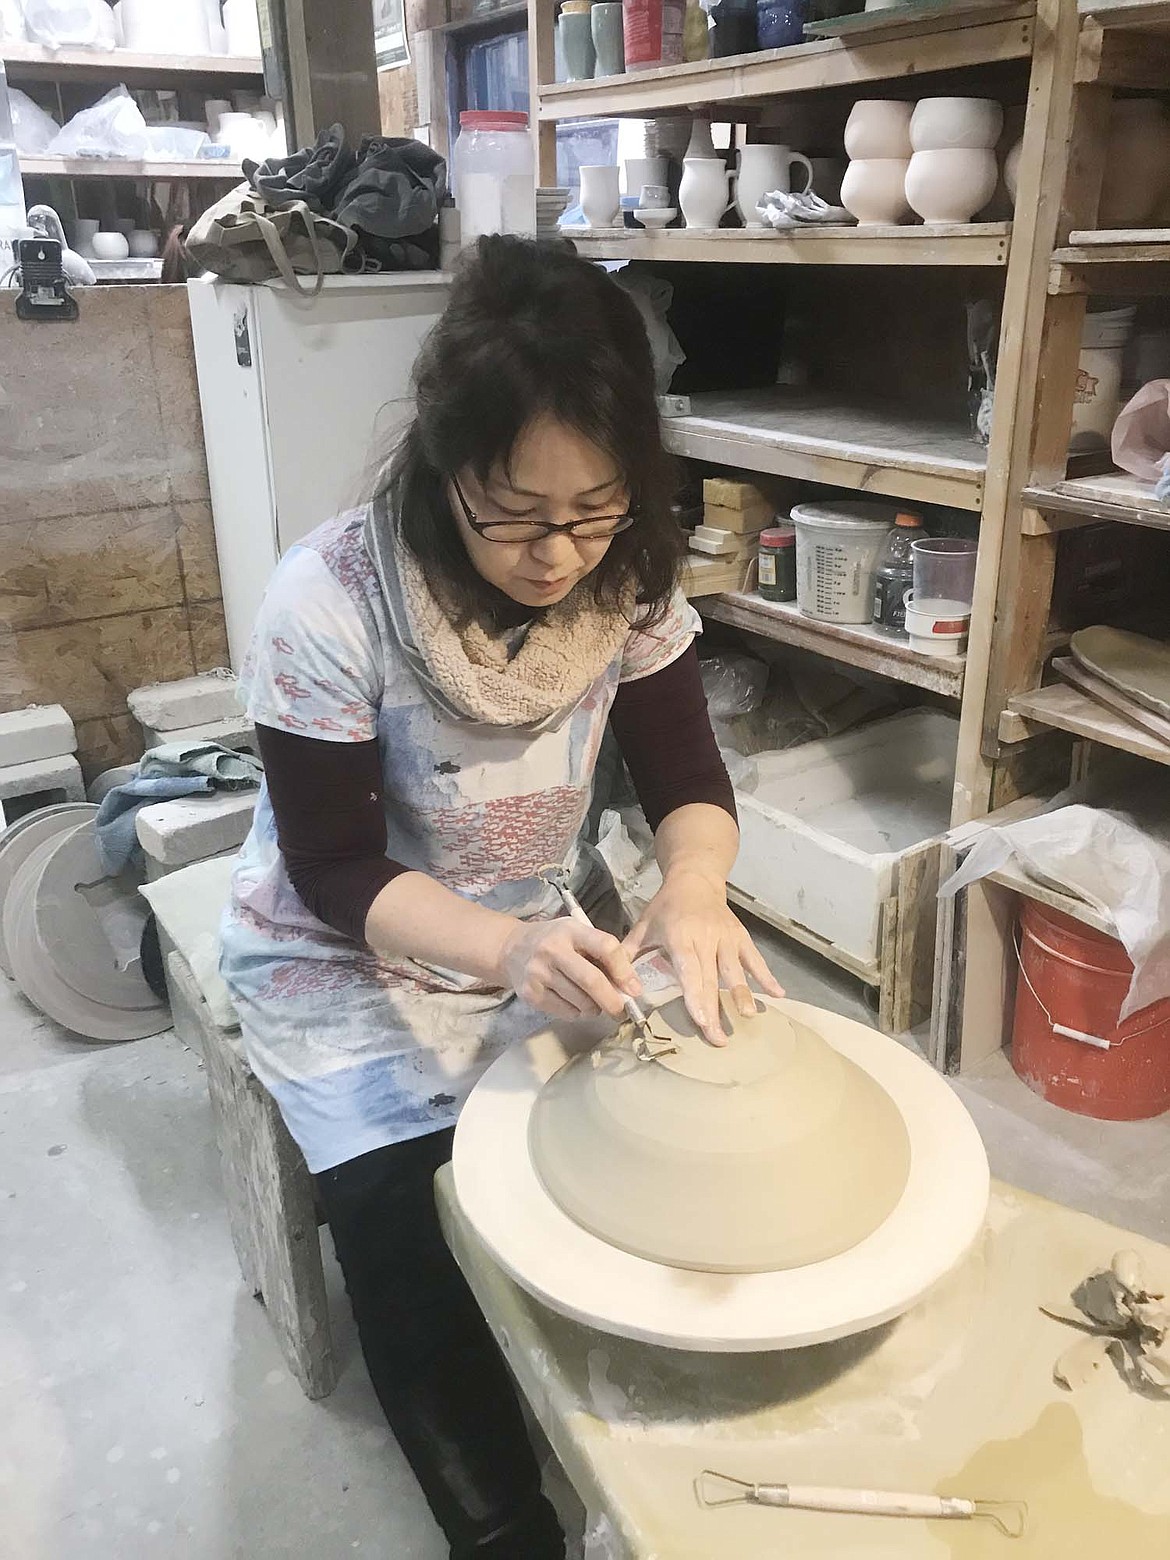 Potter Kazuyo Taguchi works on a piece at Whitefish Pottery Studios that was placed in a wood-fired kiln at the studio. She is one of three Japanese pottery artists who will have work on display at Whitefish Pottery and Stillwater Gallery during the month of May. (Courtesy photo)